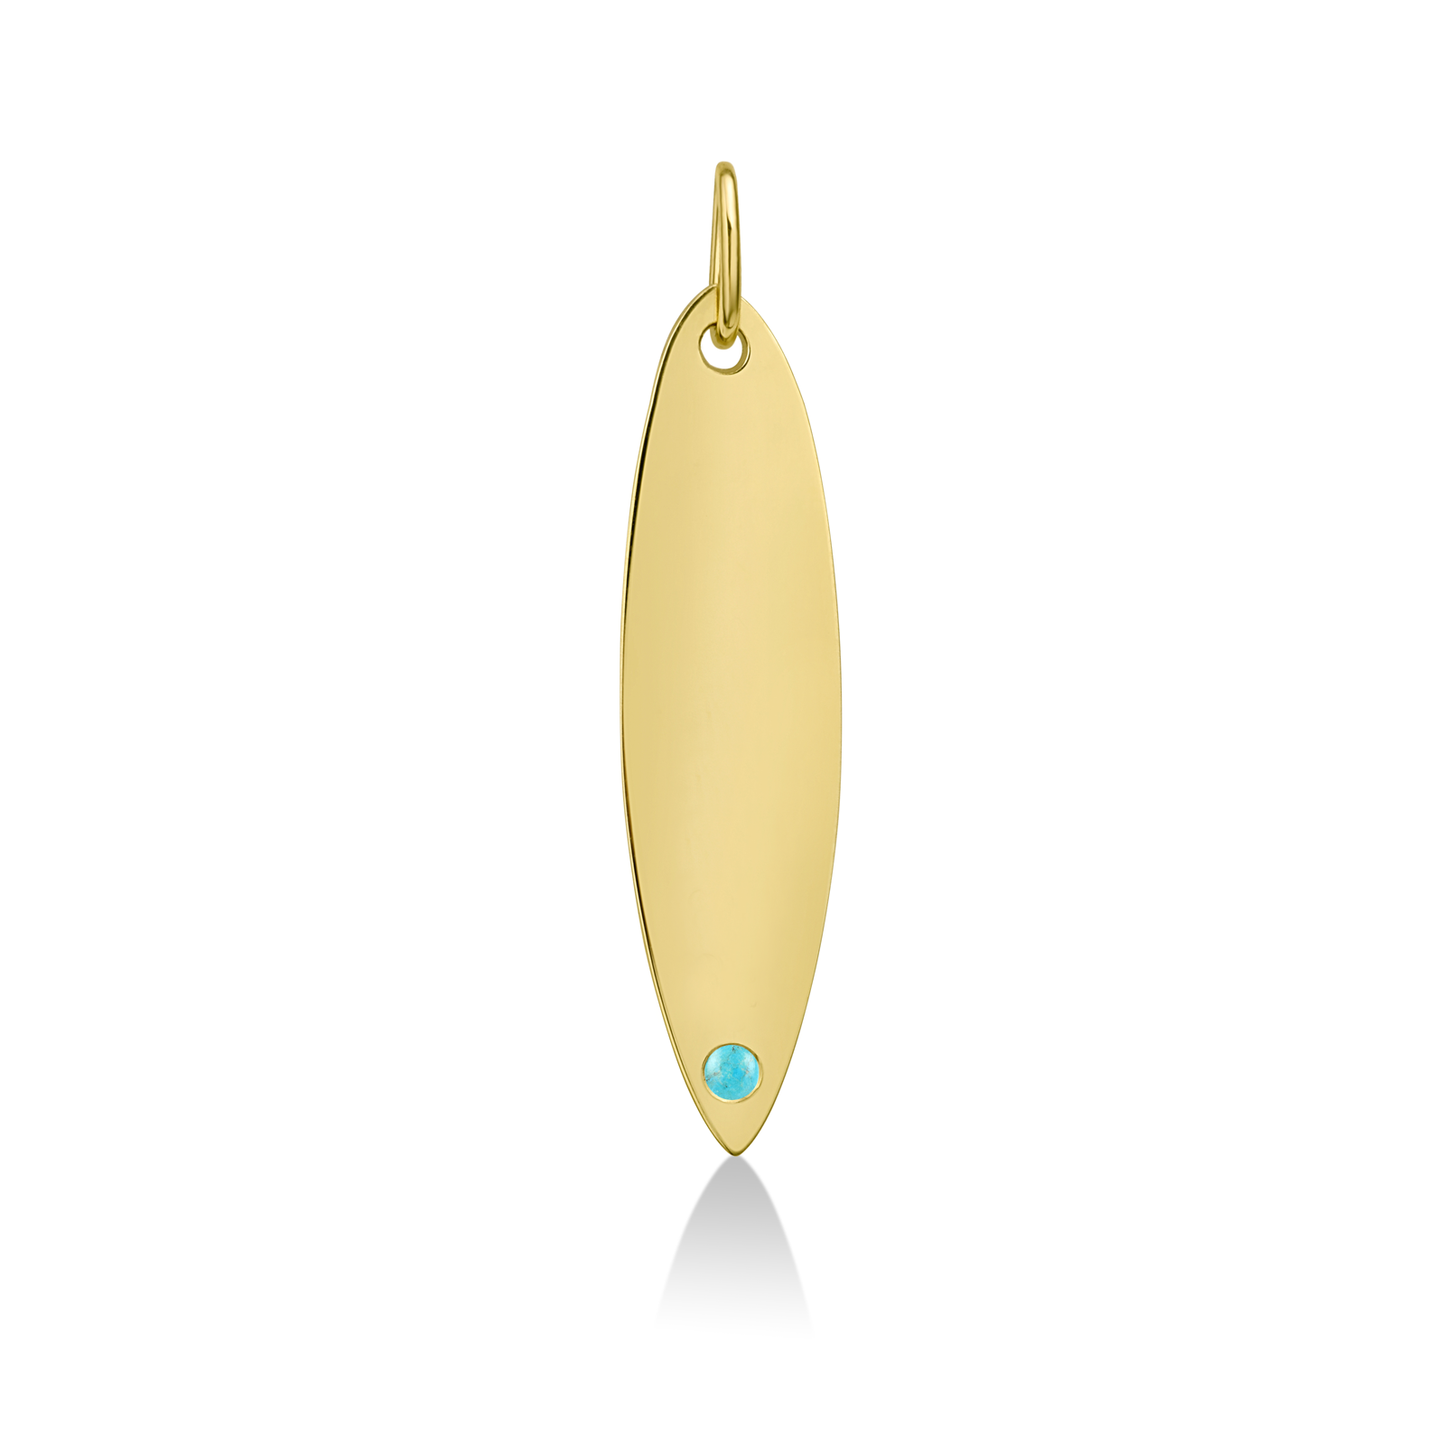 14k gold surfboard charm lock with turquoise